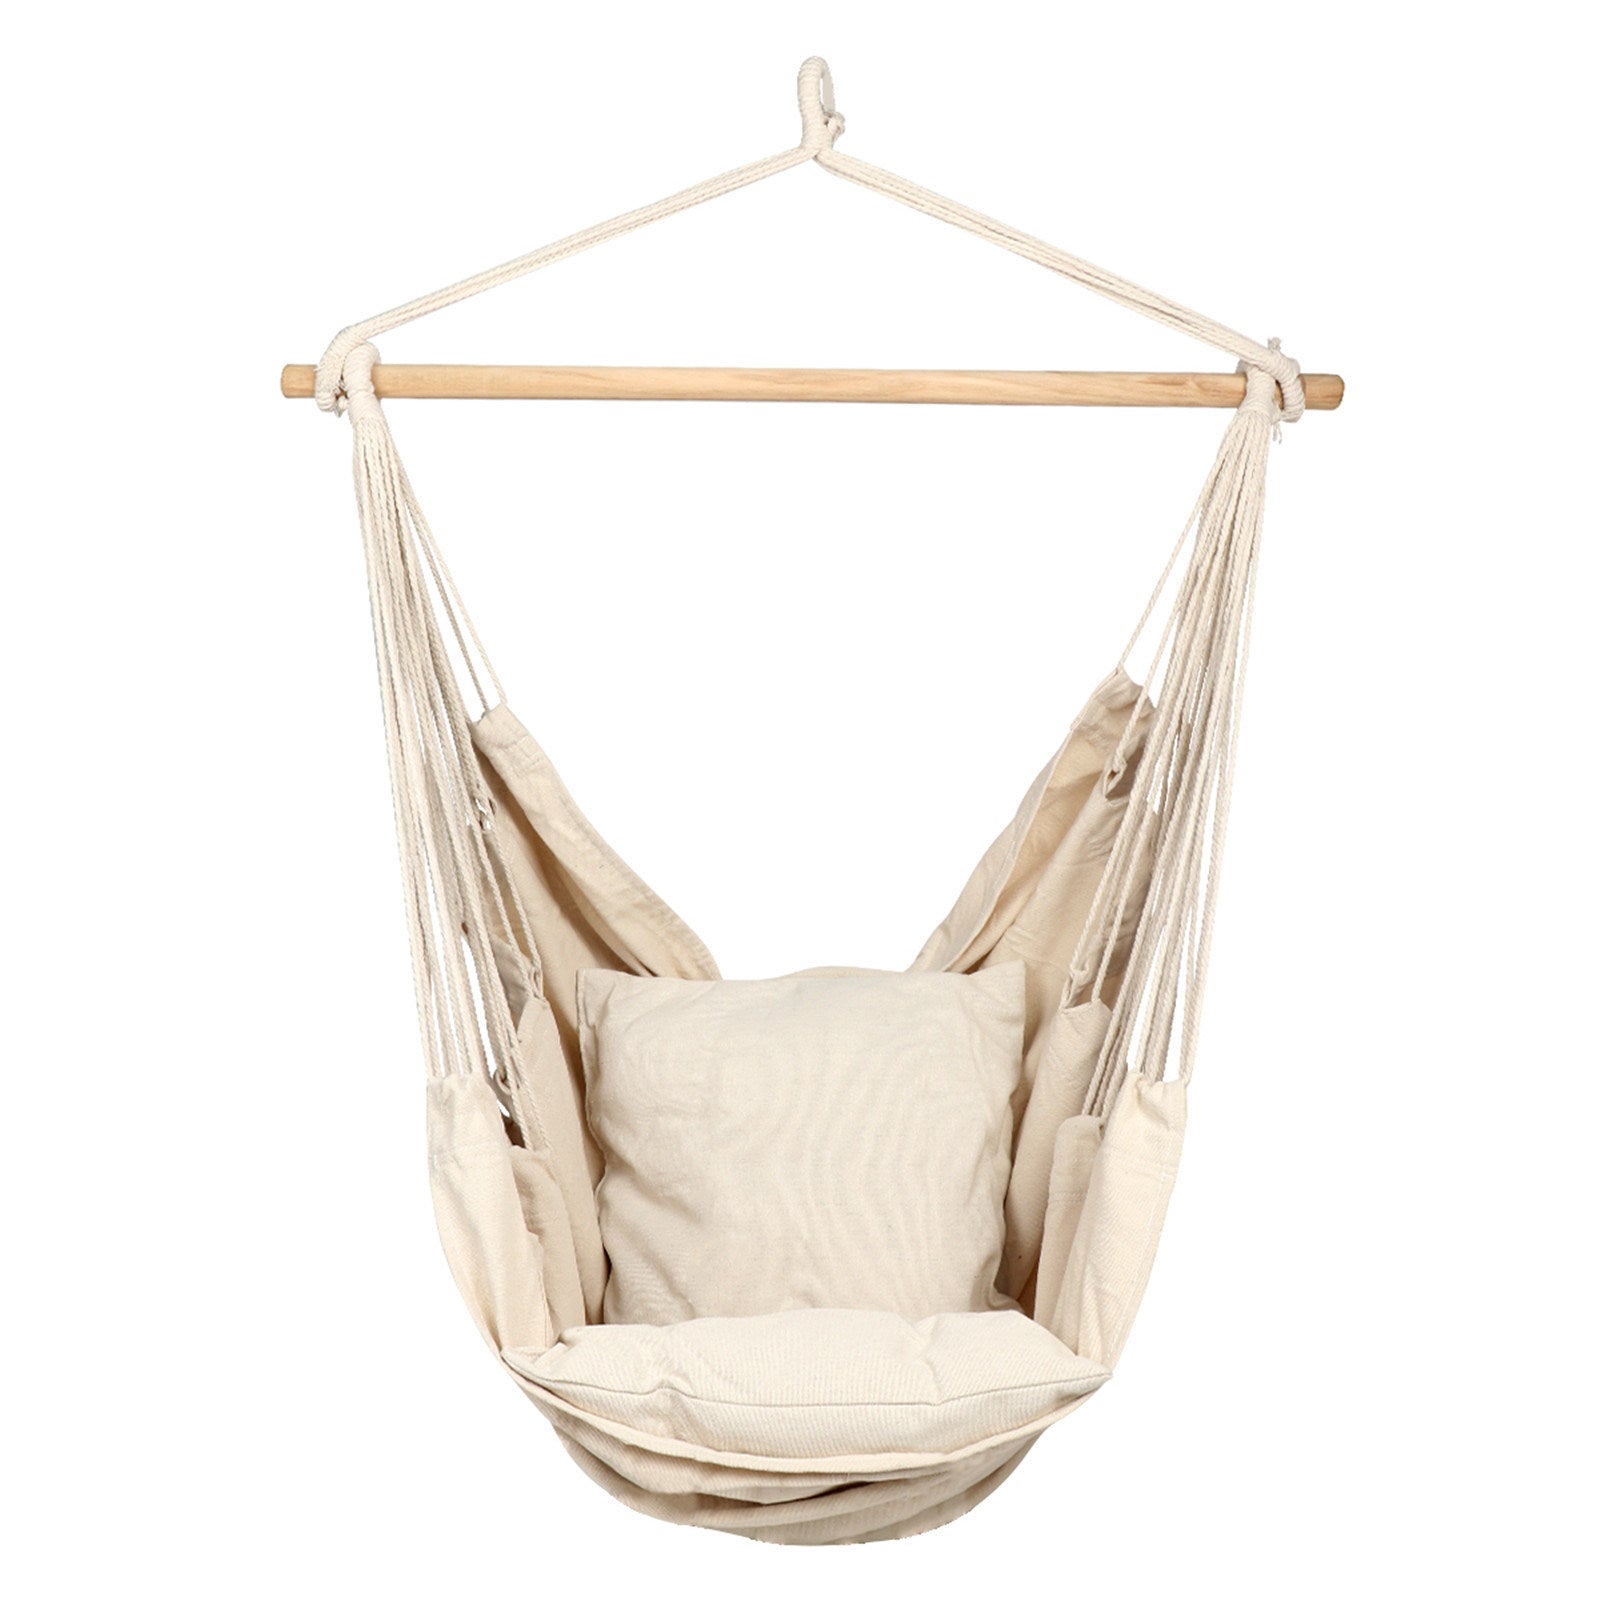 Porch Cotton Weave Porch Swing Chair for Indoor Max 265 Lbs Patio Outdoor Yard E EVERKING Hanging Rope Hammock Chair Swing Seat with Two Seat Cushions and Carrying Bag Garden 